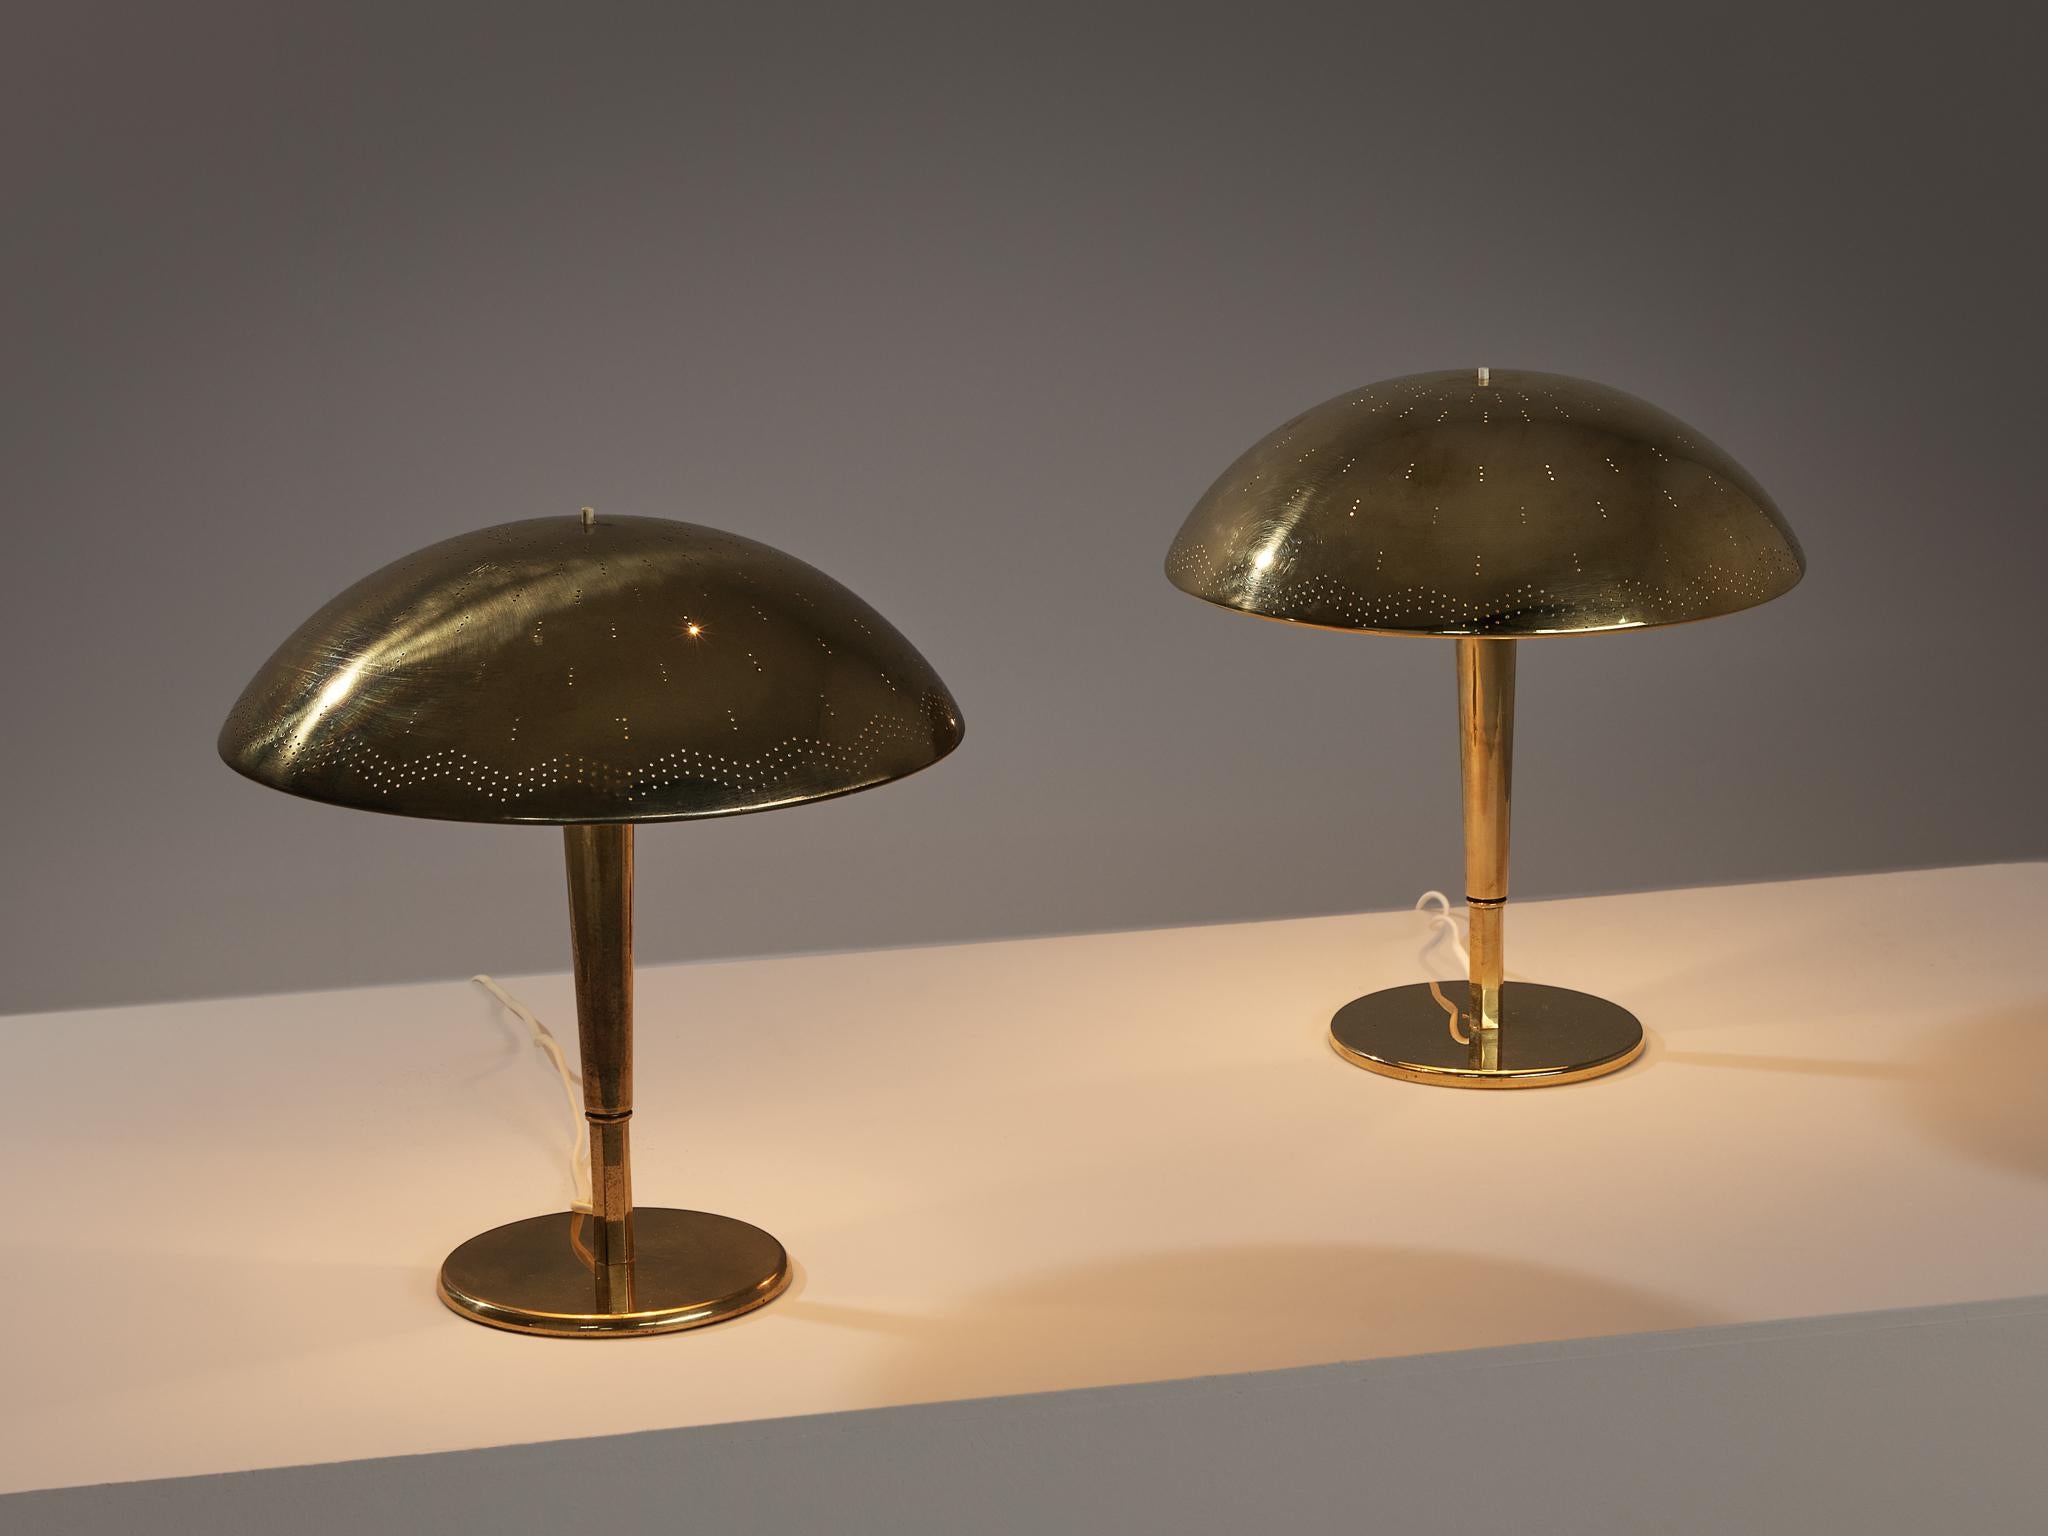 Paavo Tynell for Taito Oy, table lamps, model ‘5061’, brass, Finland, circa 1950

A truly magnificent piece that scores highly on every design aspect: execution, use of materials, craftsmanship, and detail. Paavo Tynell, the master in the fields